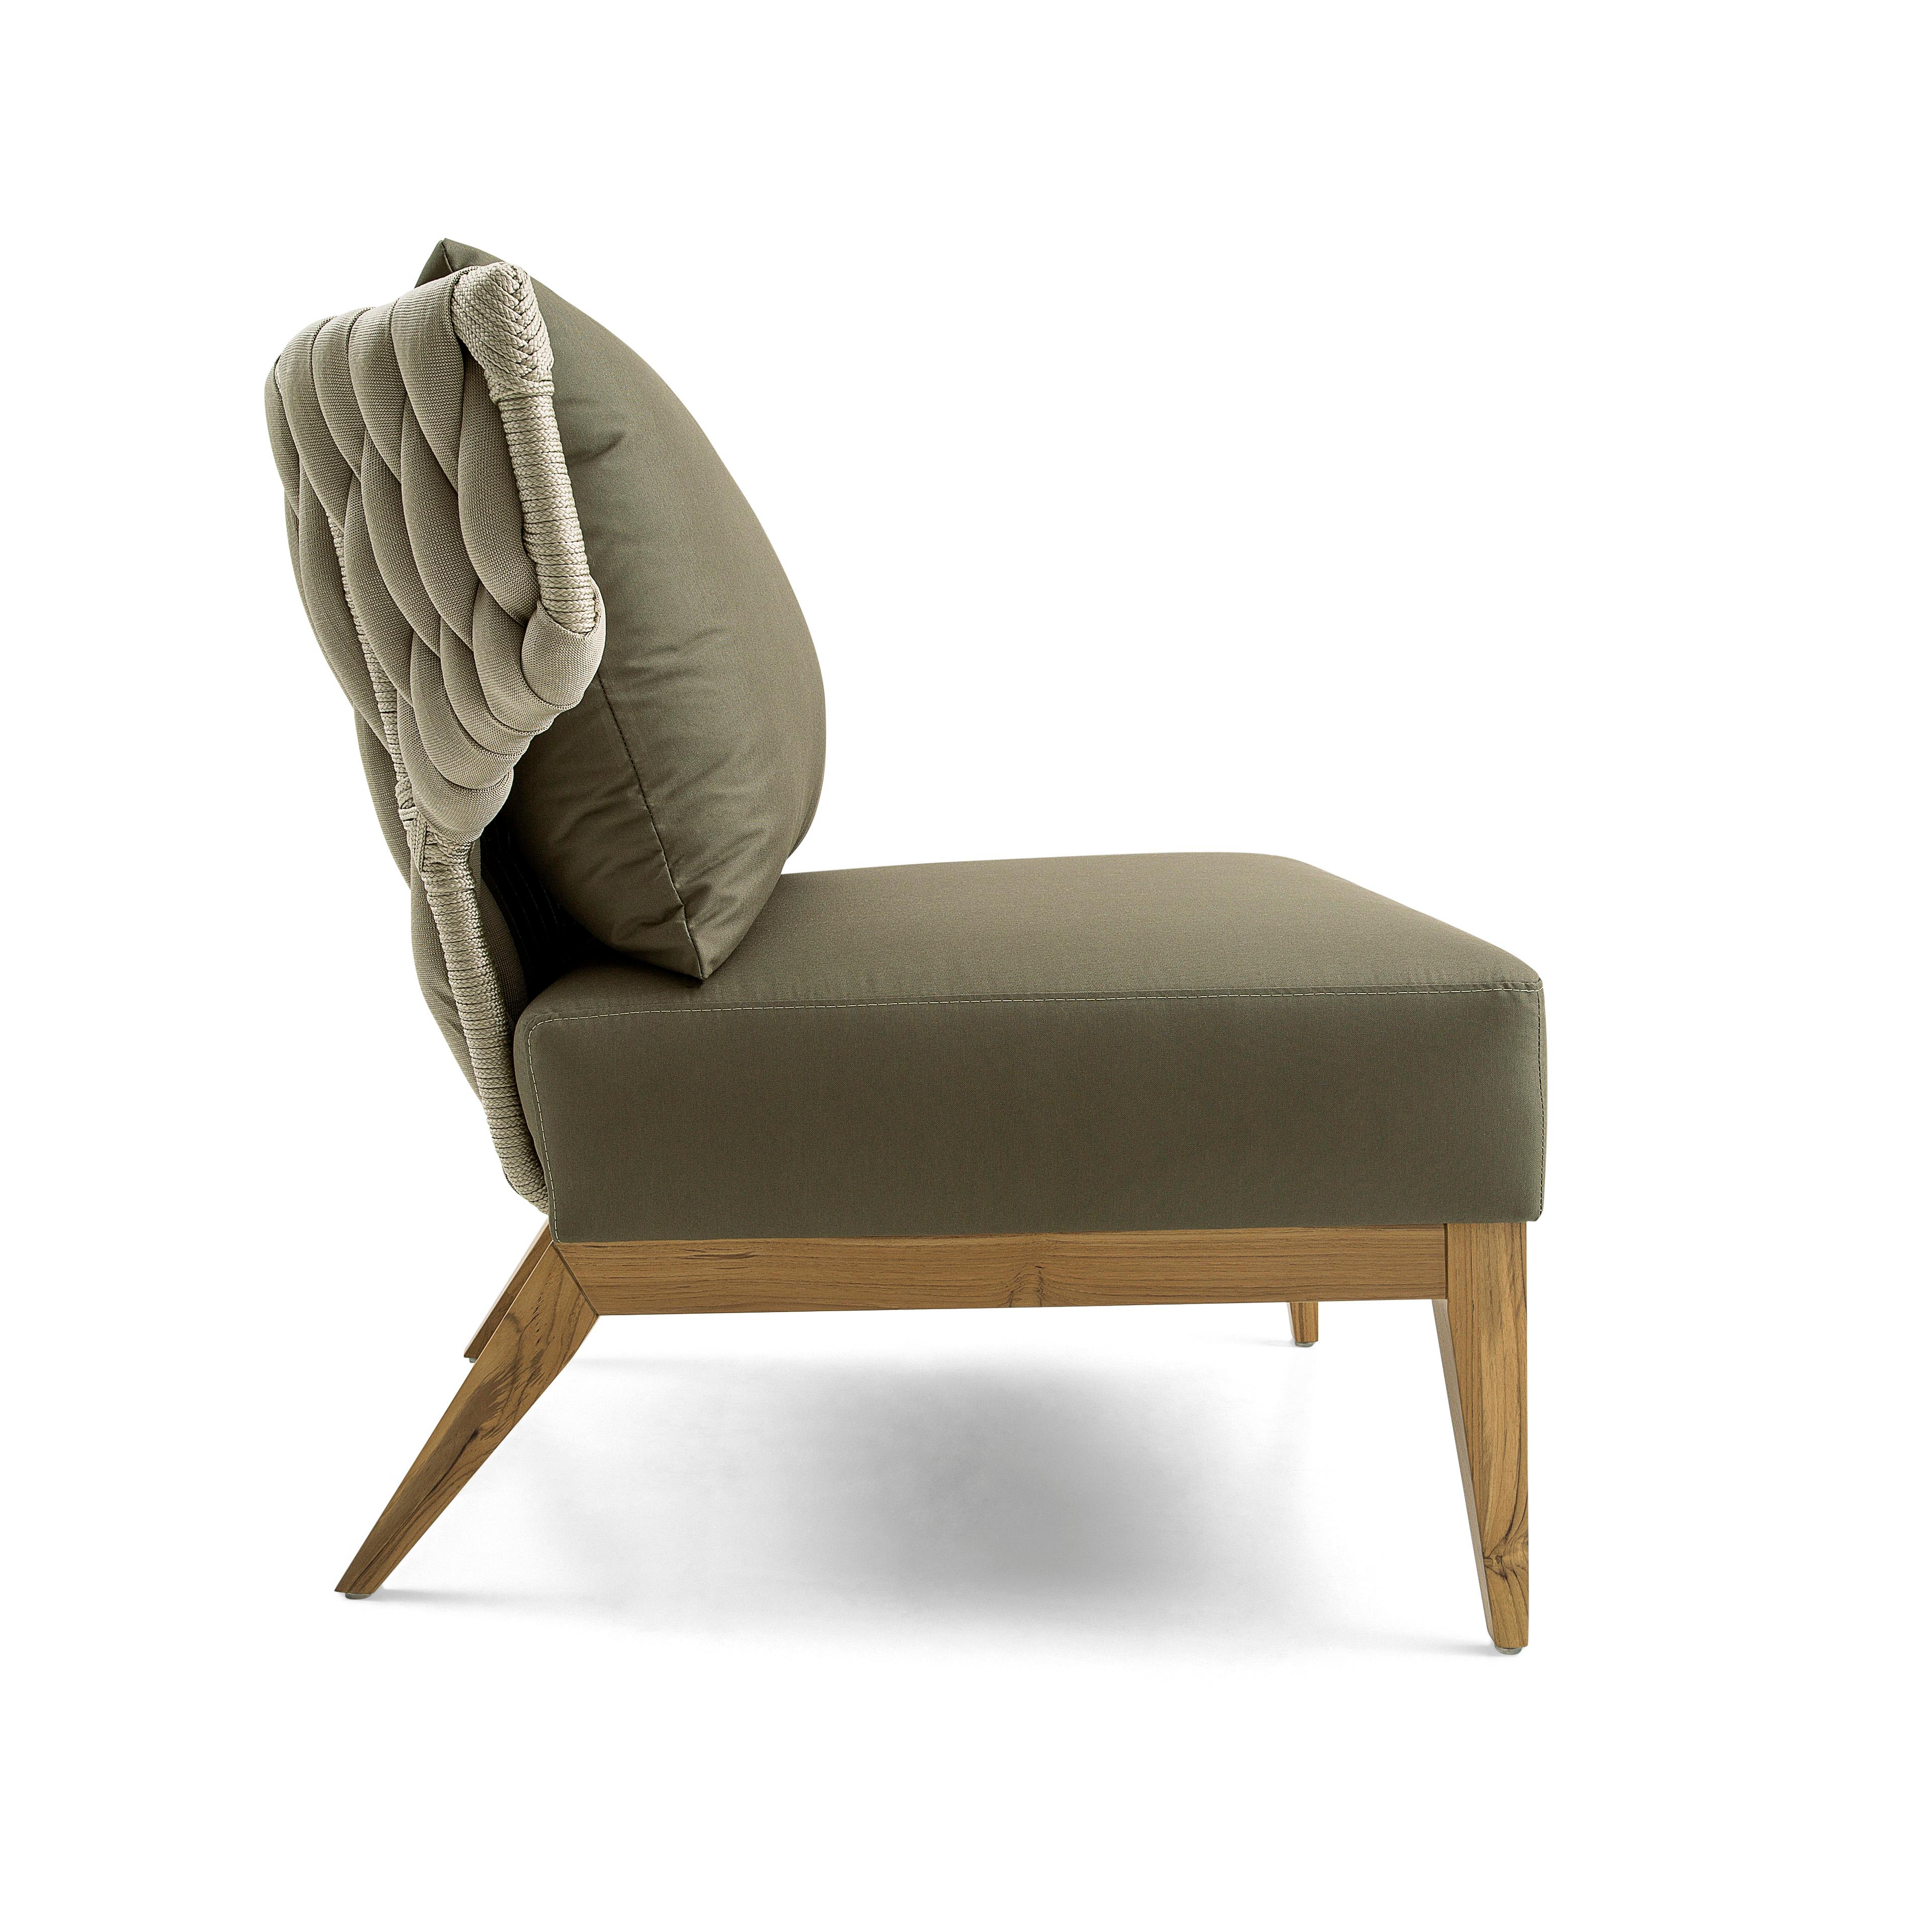 Brazilian Beluga Outdoor Armchair in Olive Green fabric and Teak wood For Sale